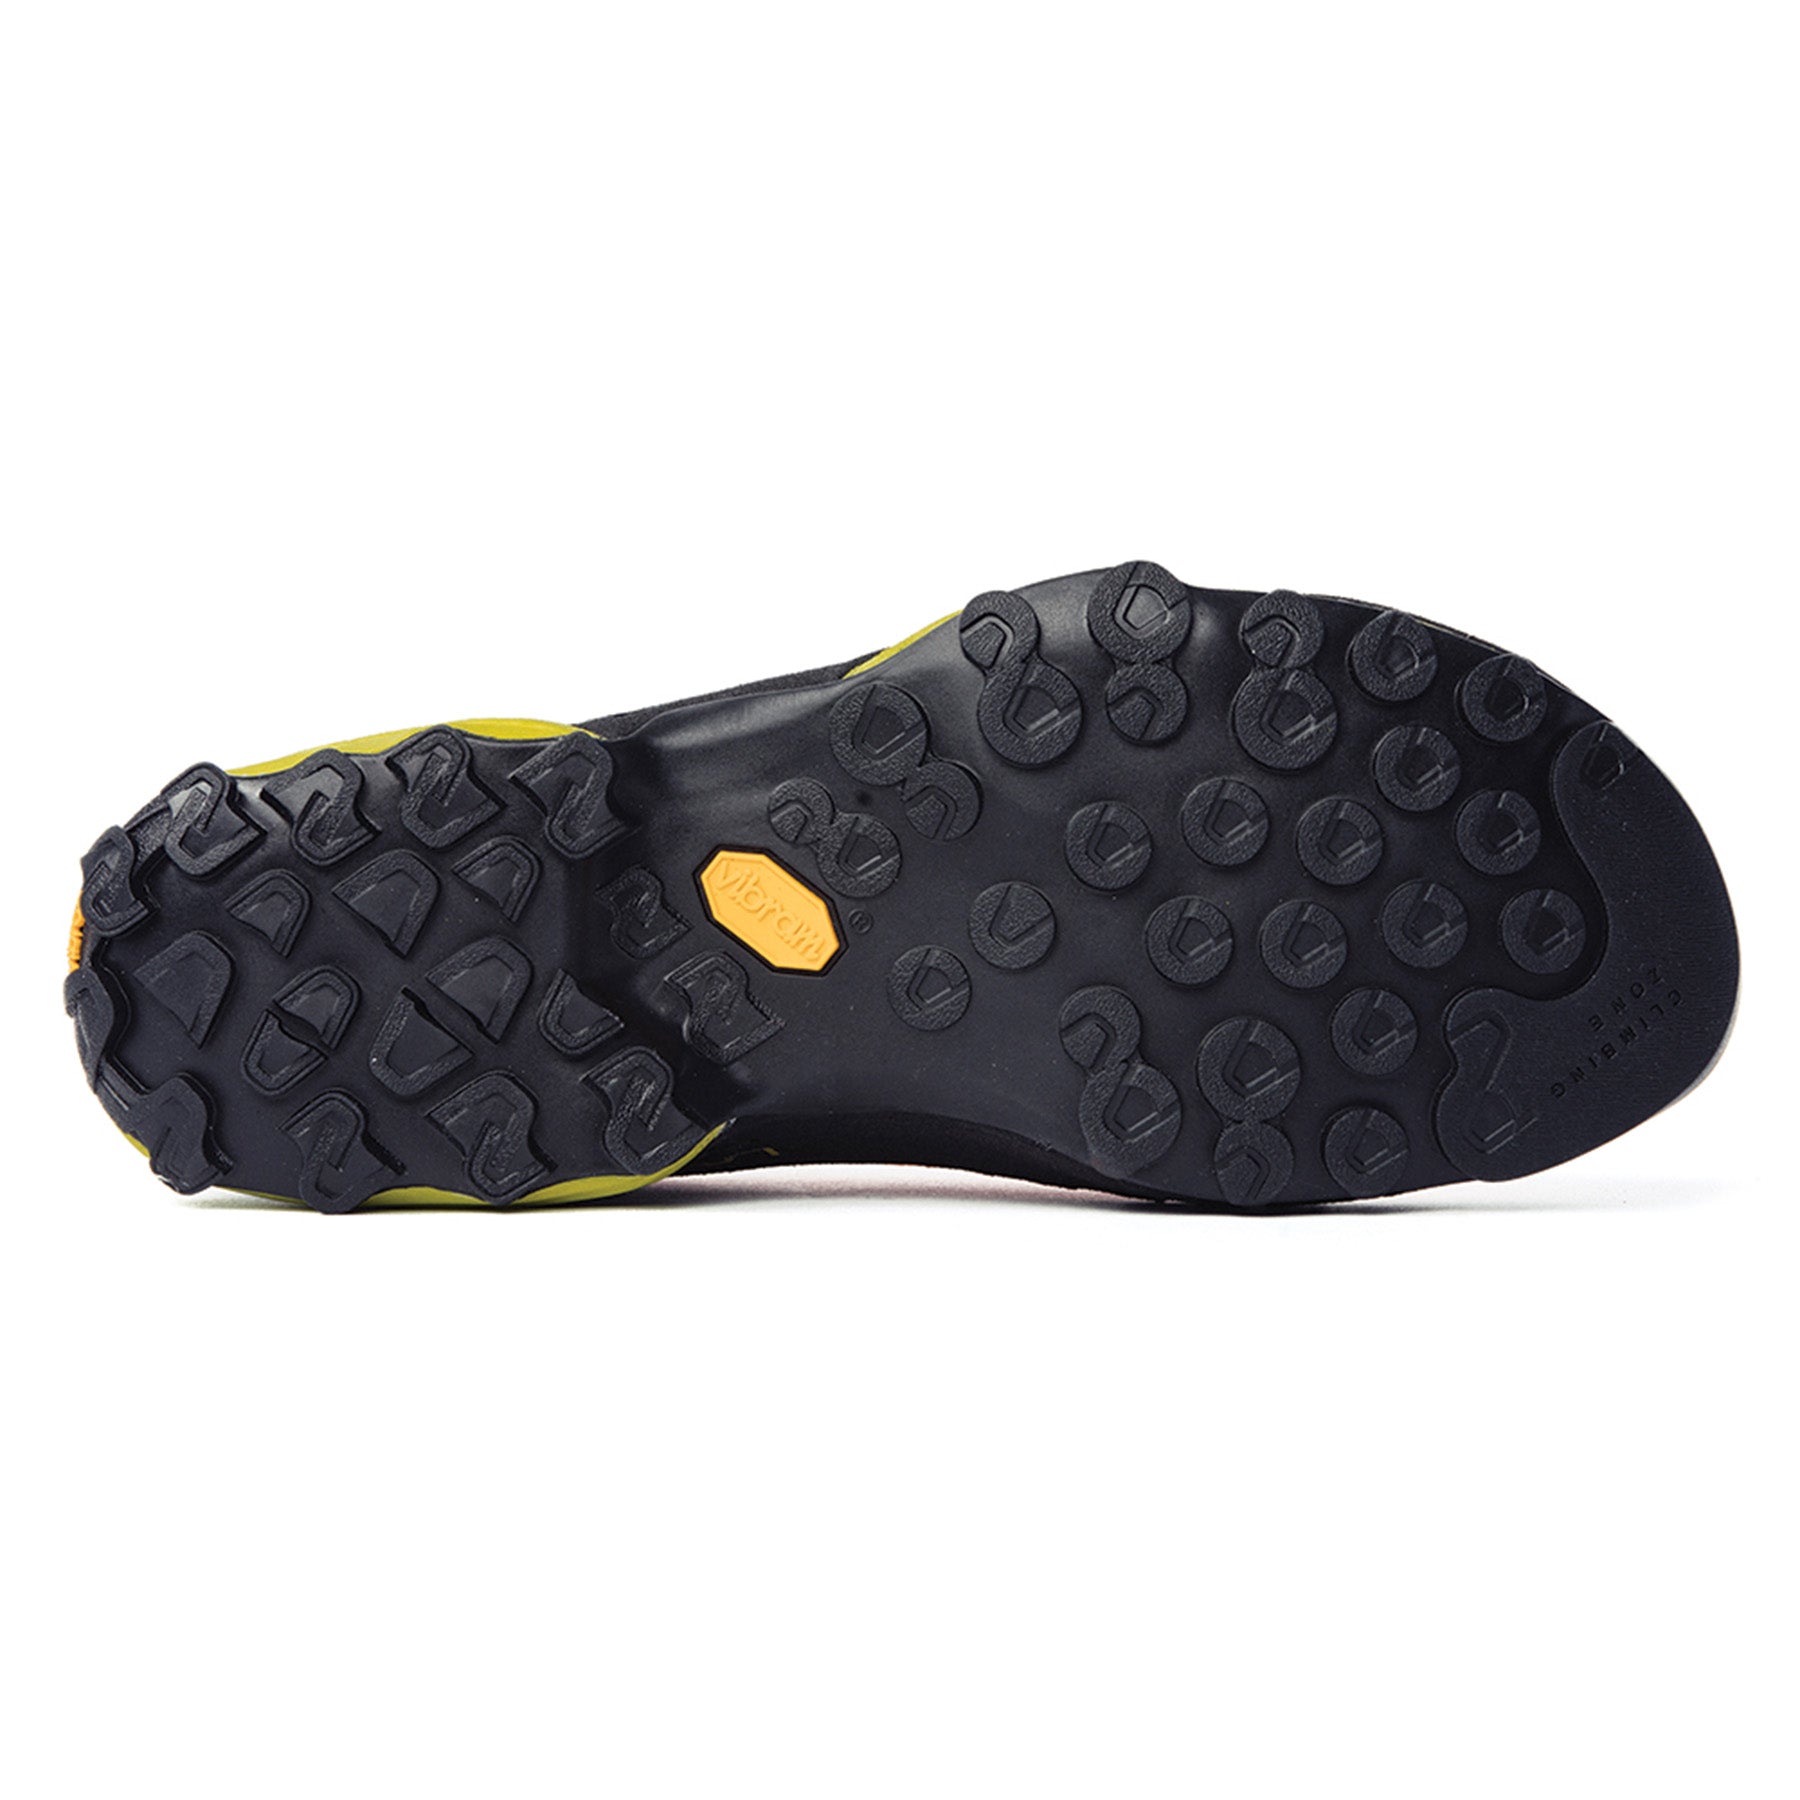 vibram rubber sole on the tx3's